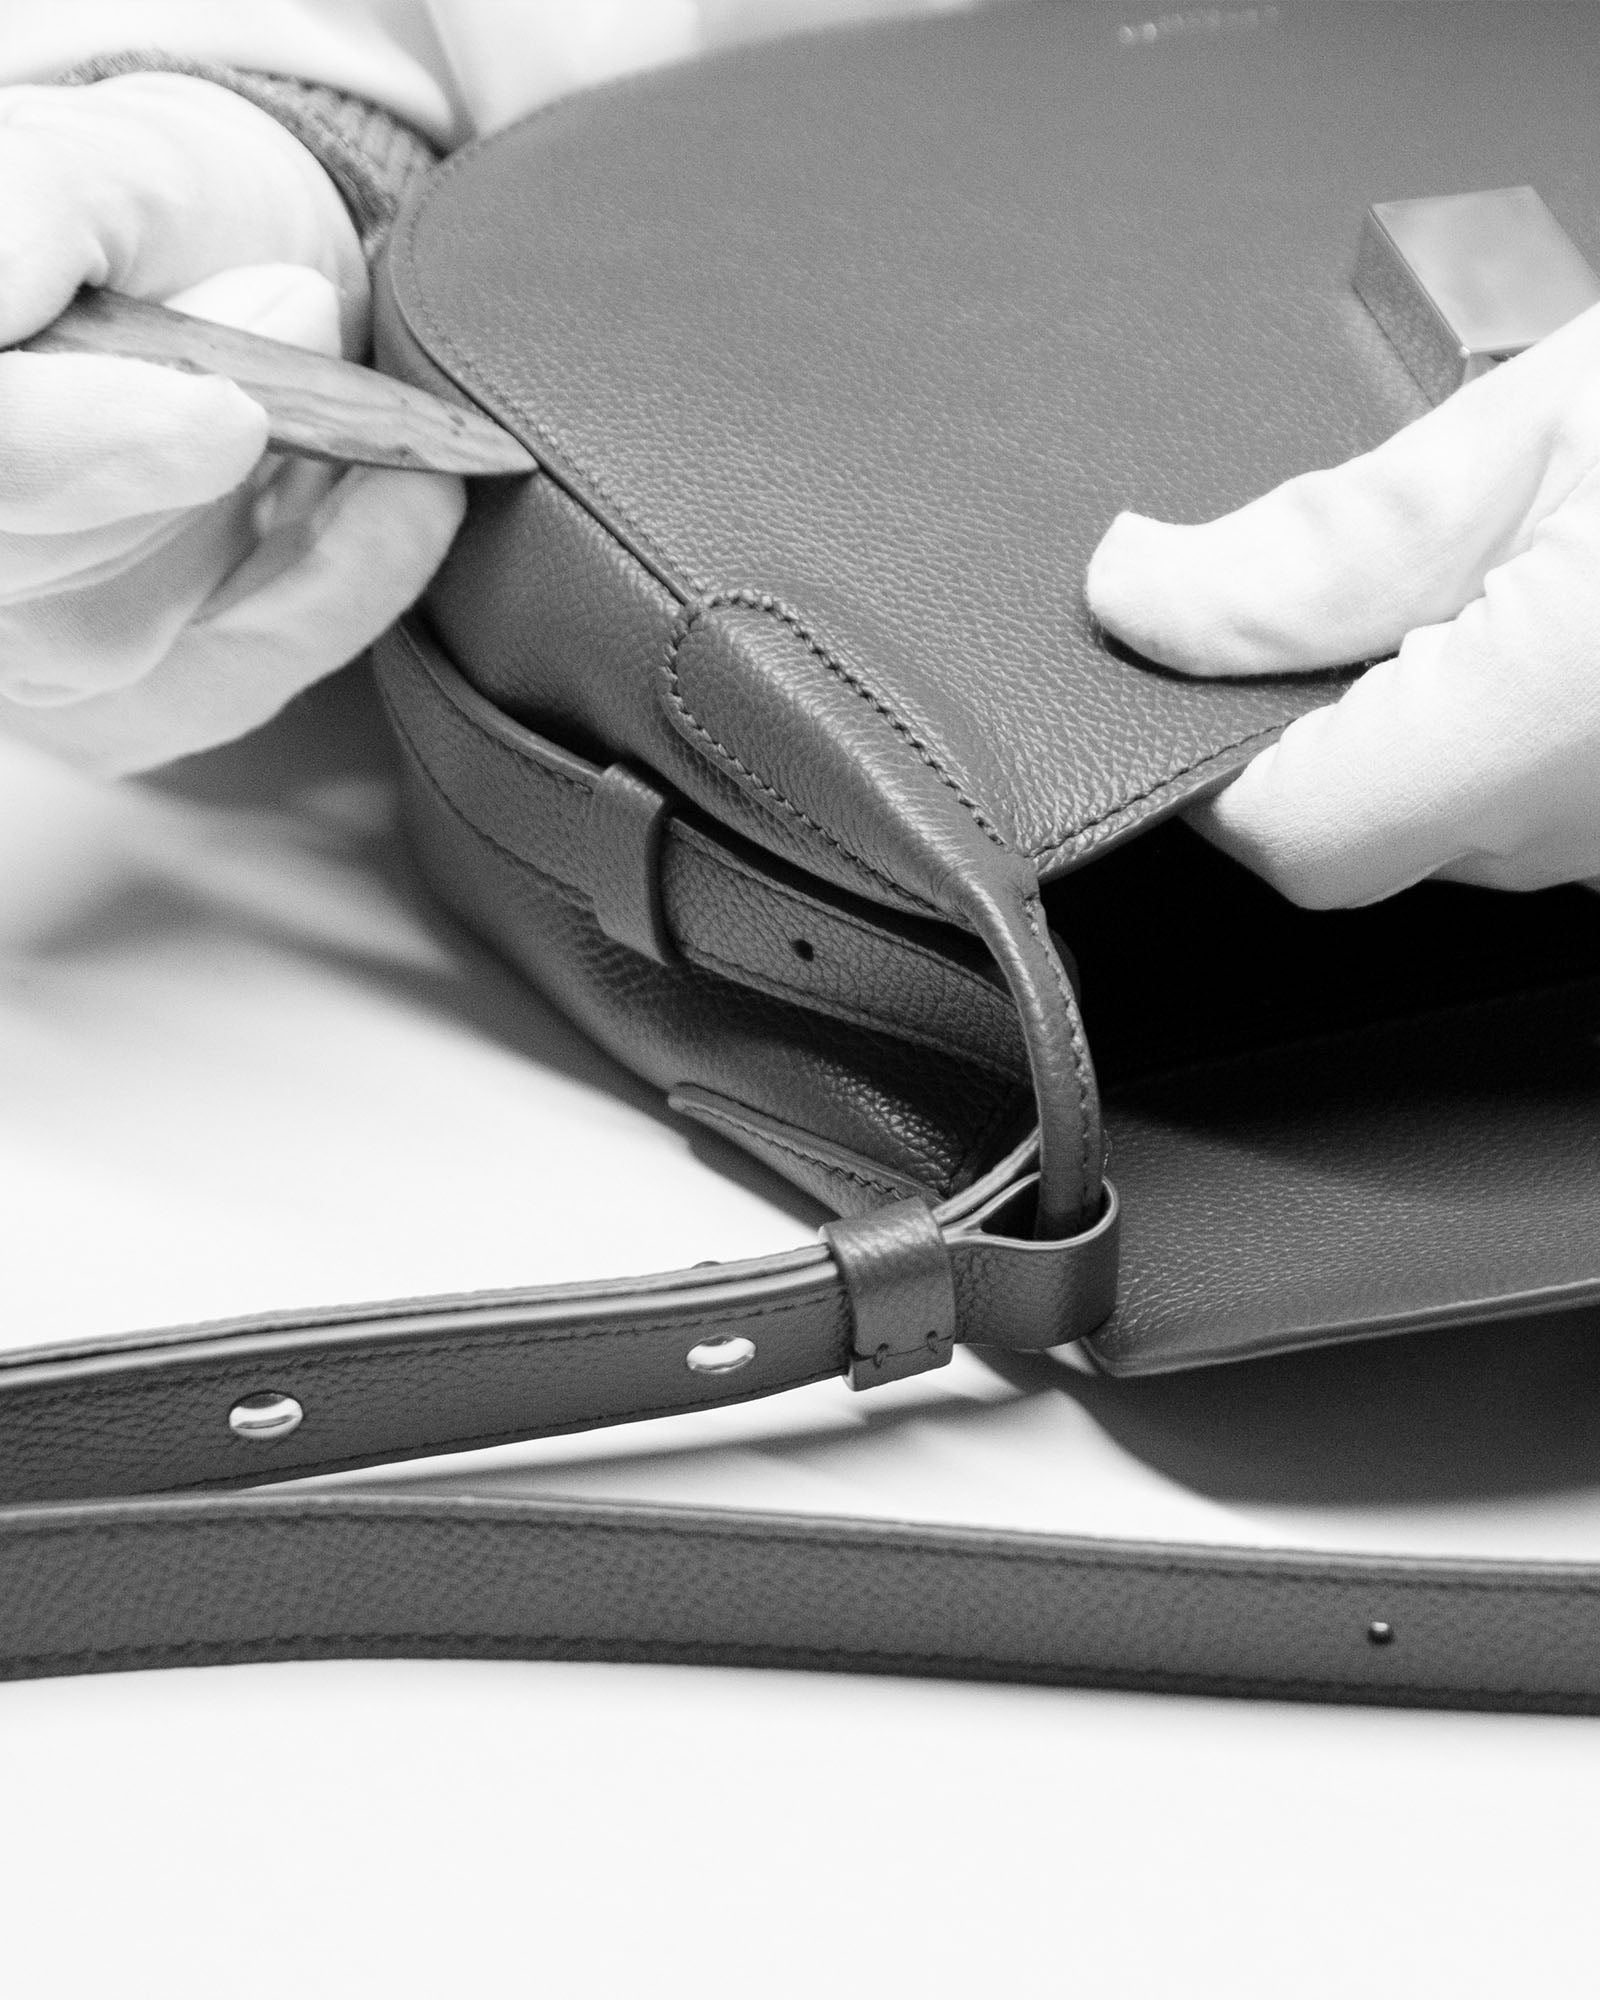 Discover Spain: The Hub of Ethical European Handbag Manufacturing